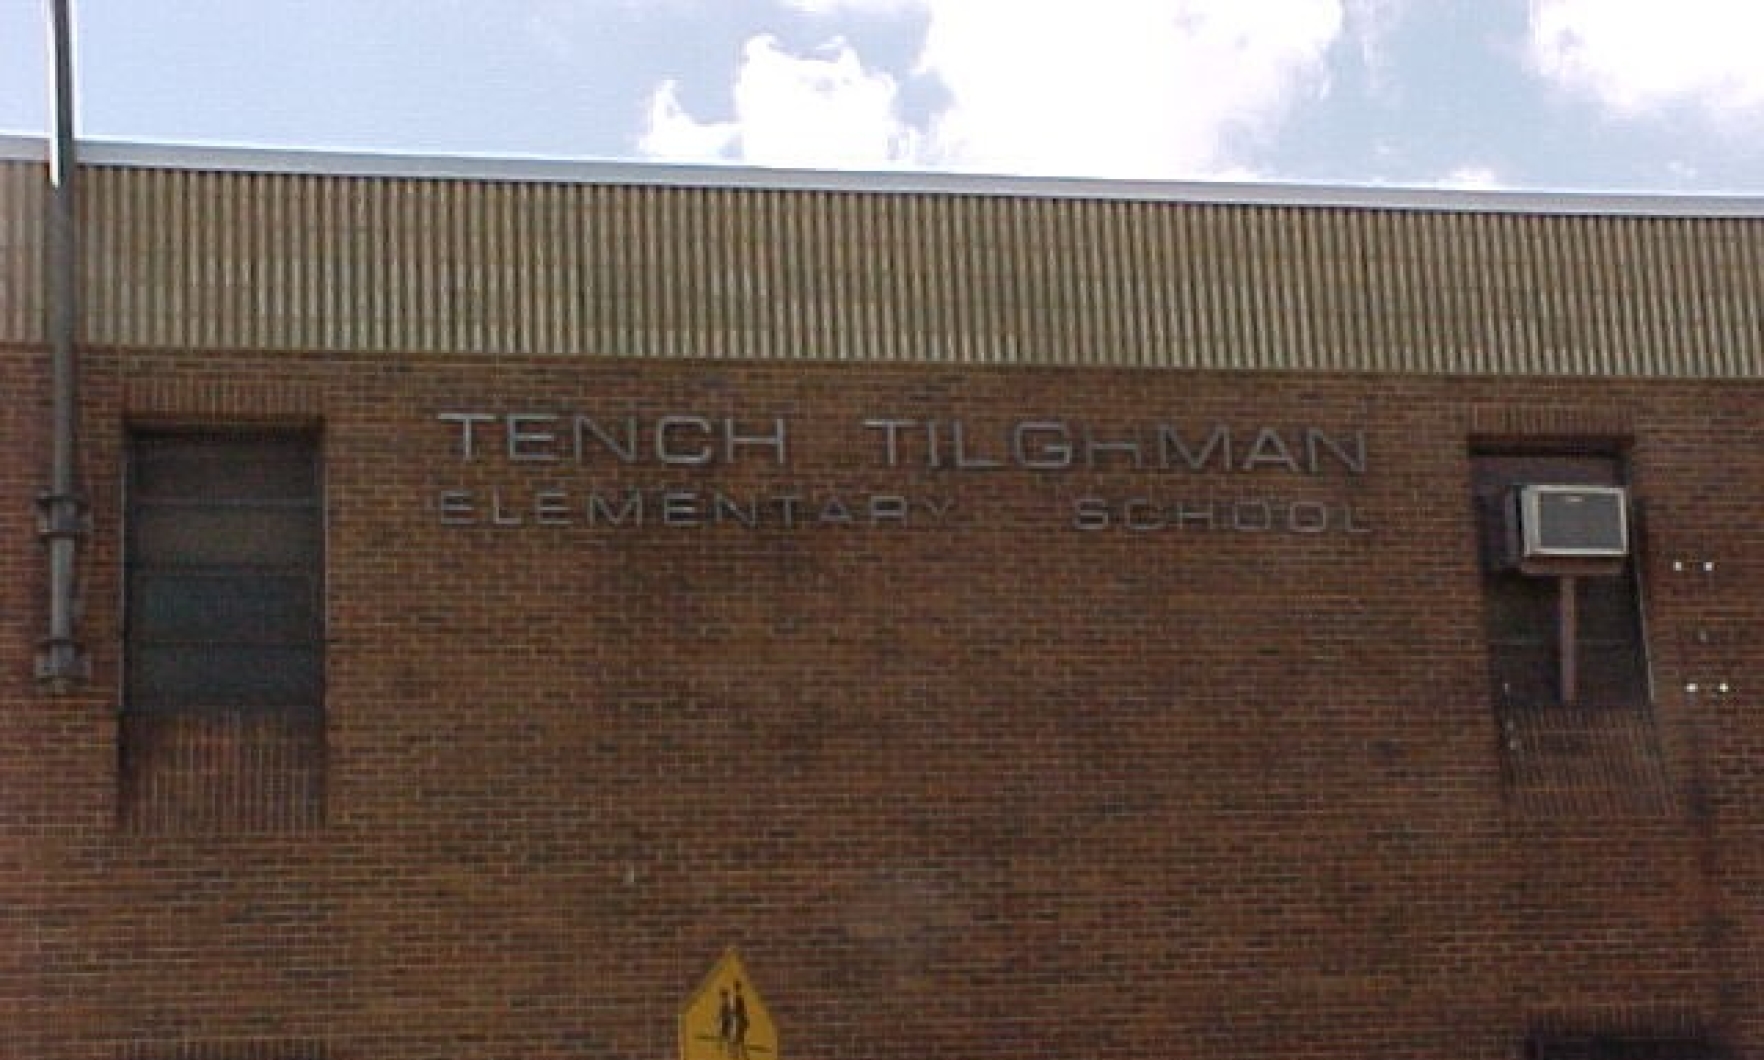 Tench Tilghman Elementary/Middle School - Front of building